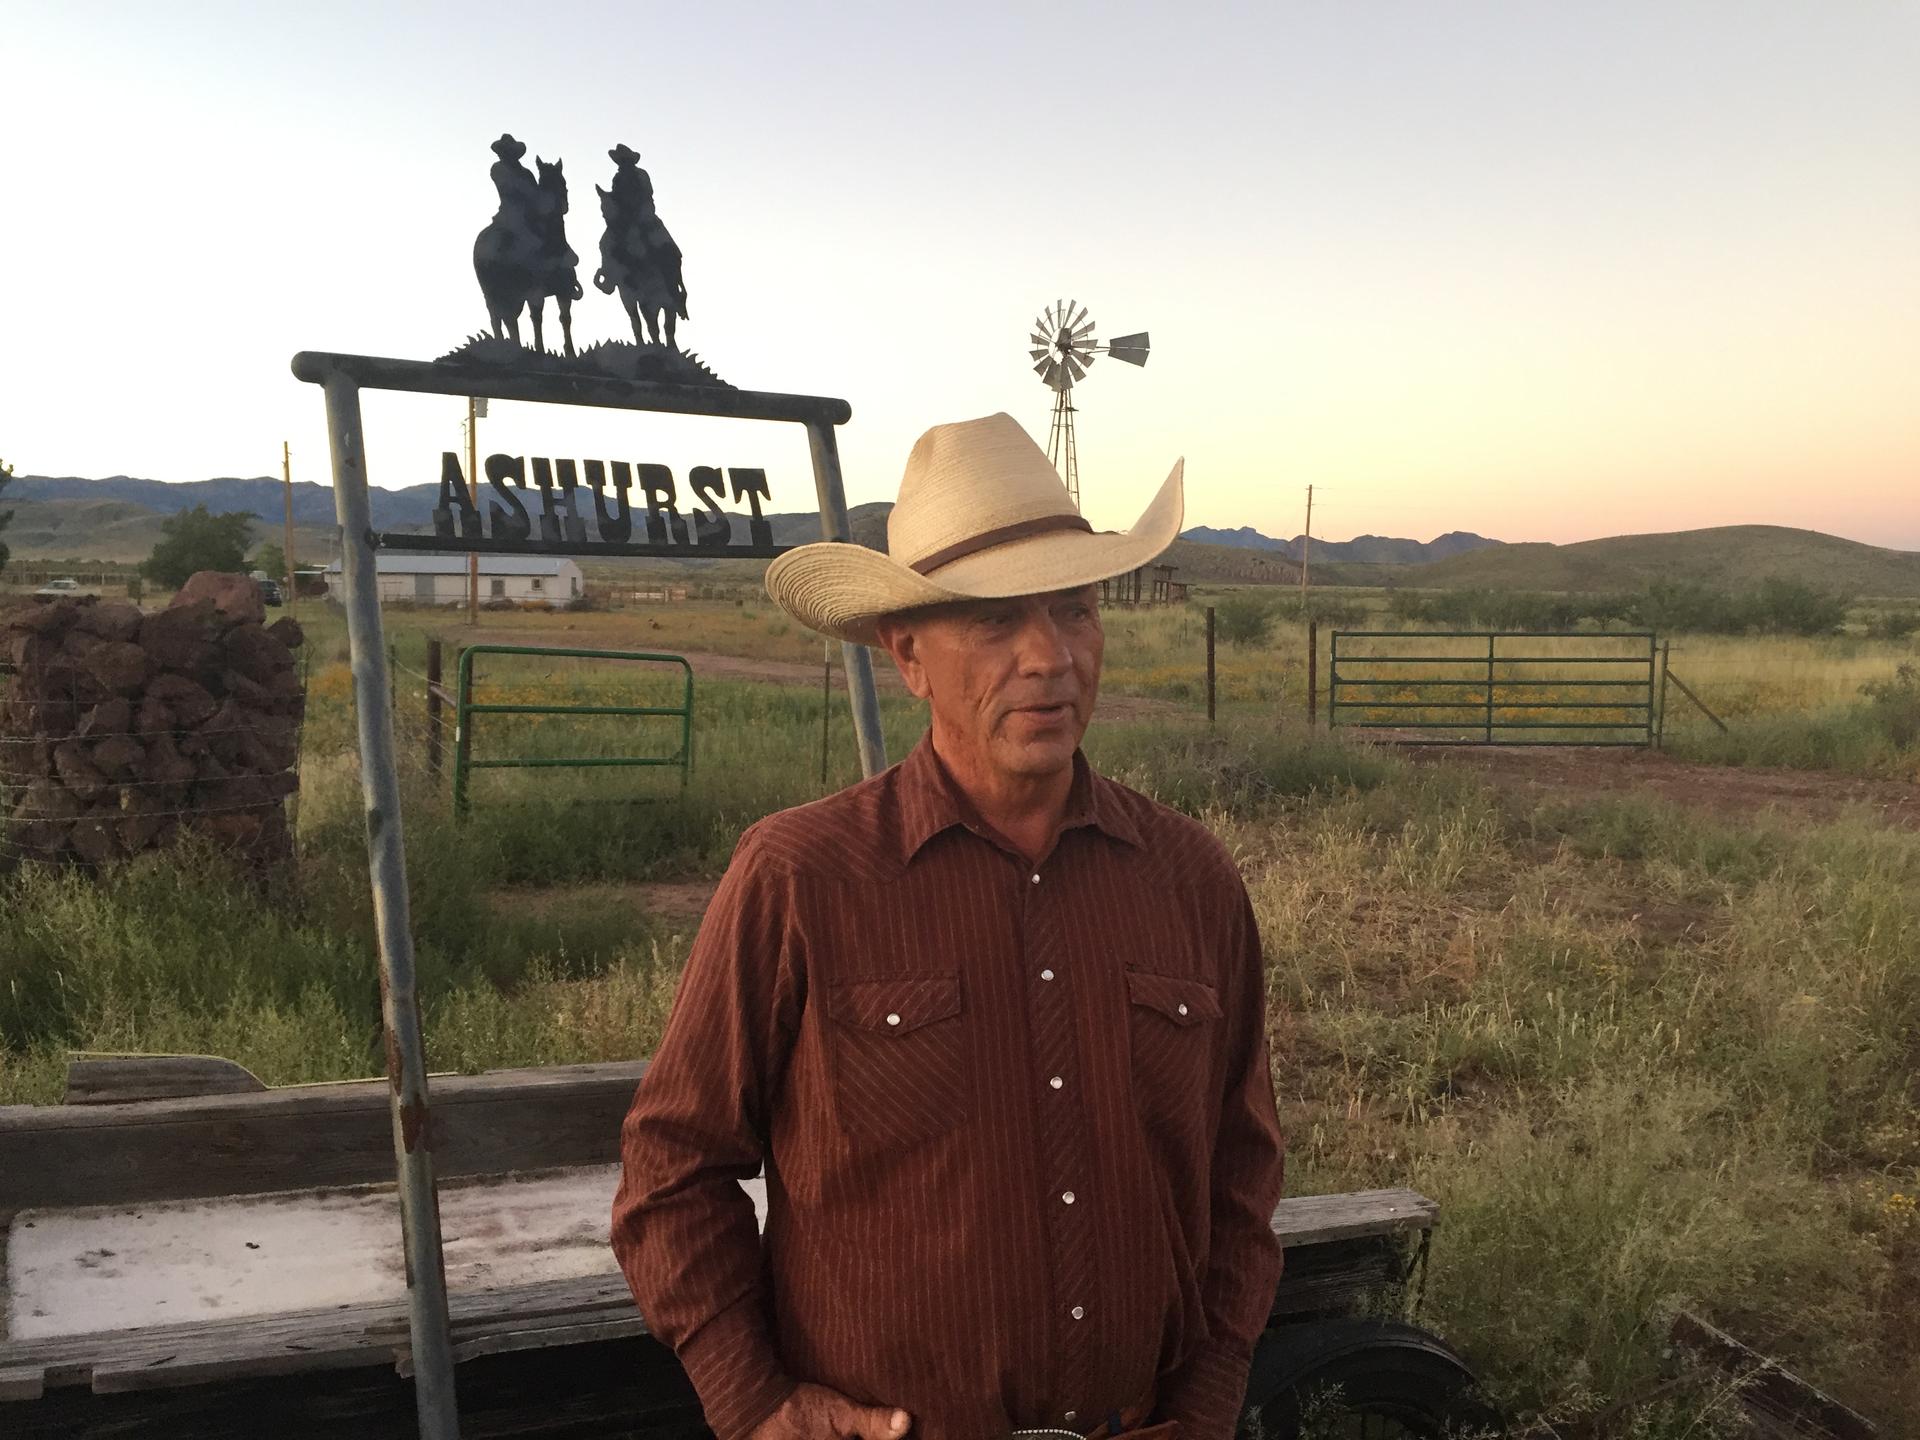 Man standing in front of ranch sign and American flag